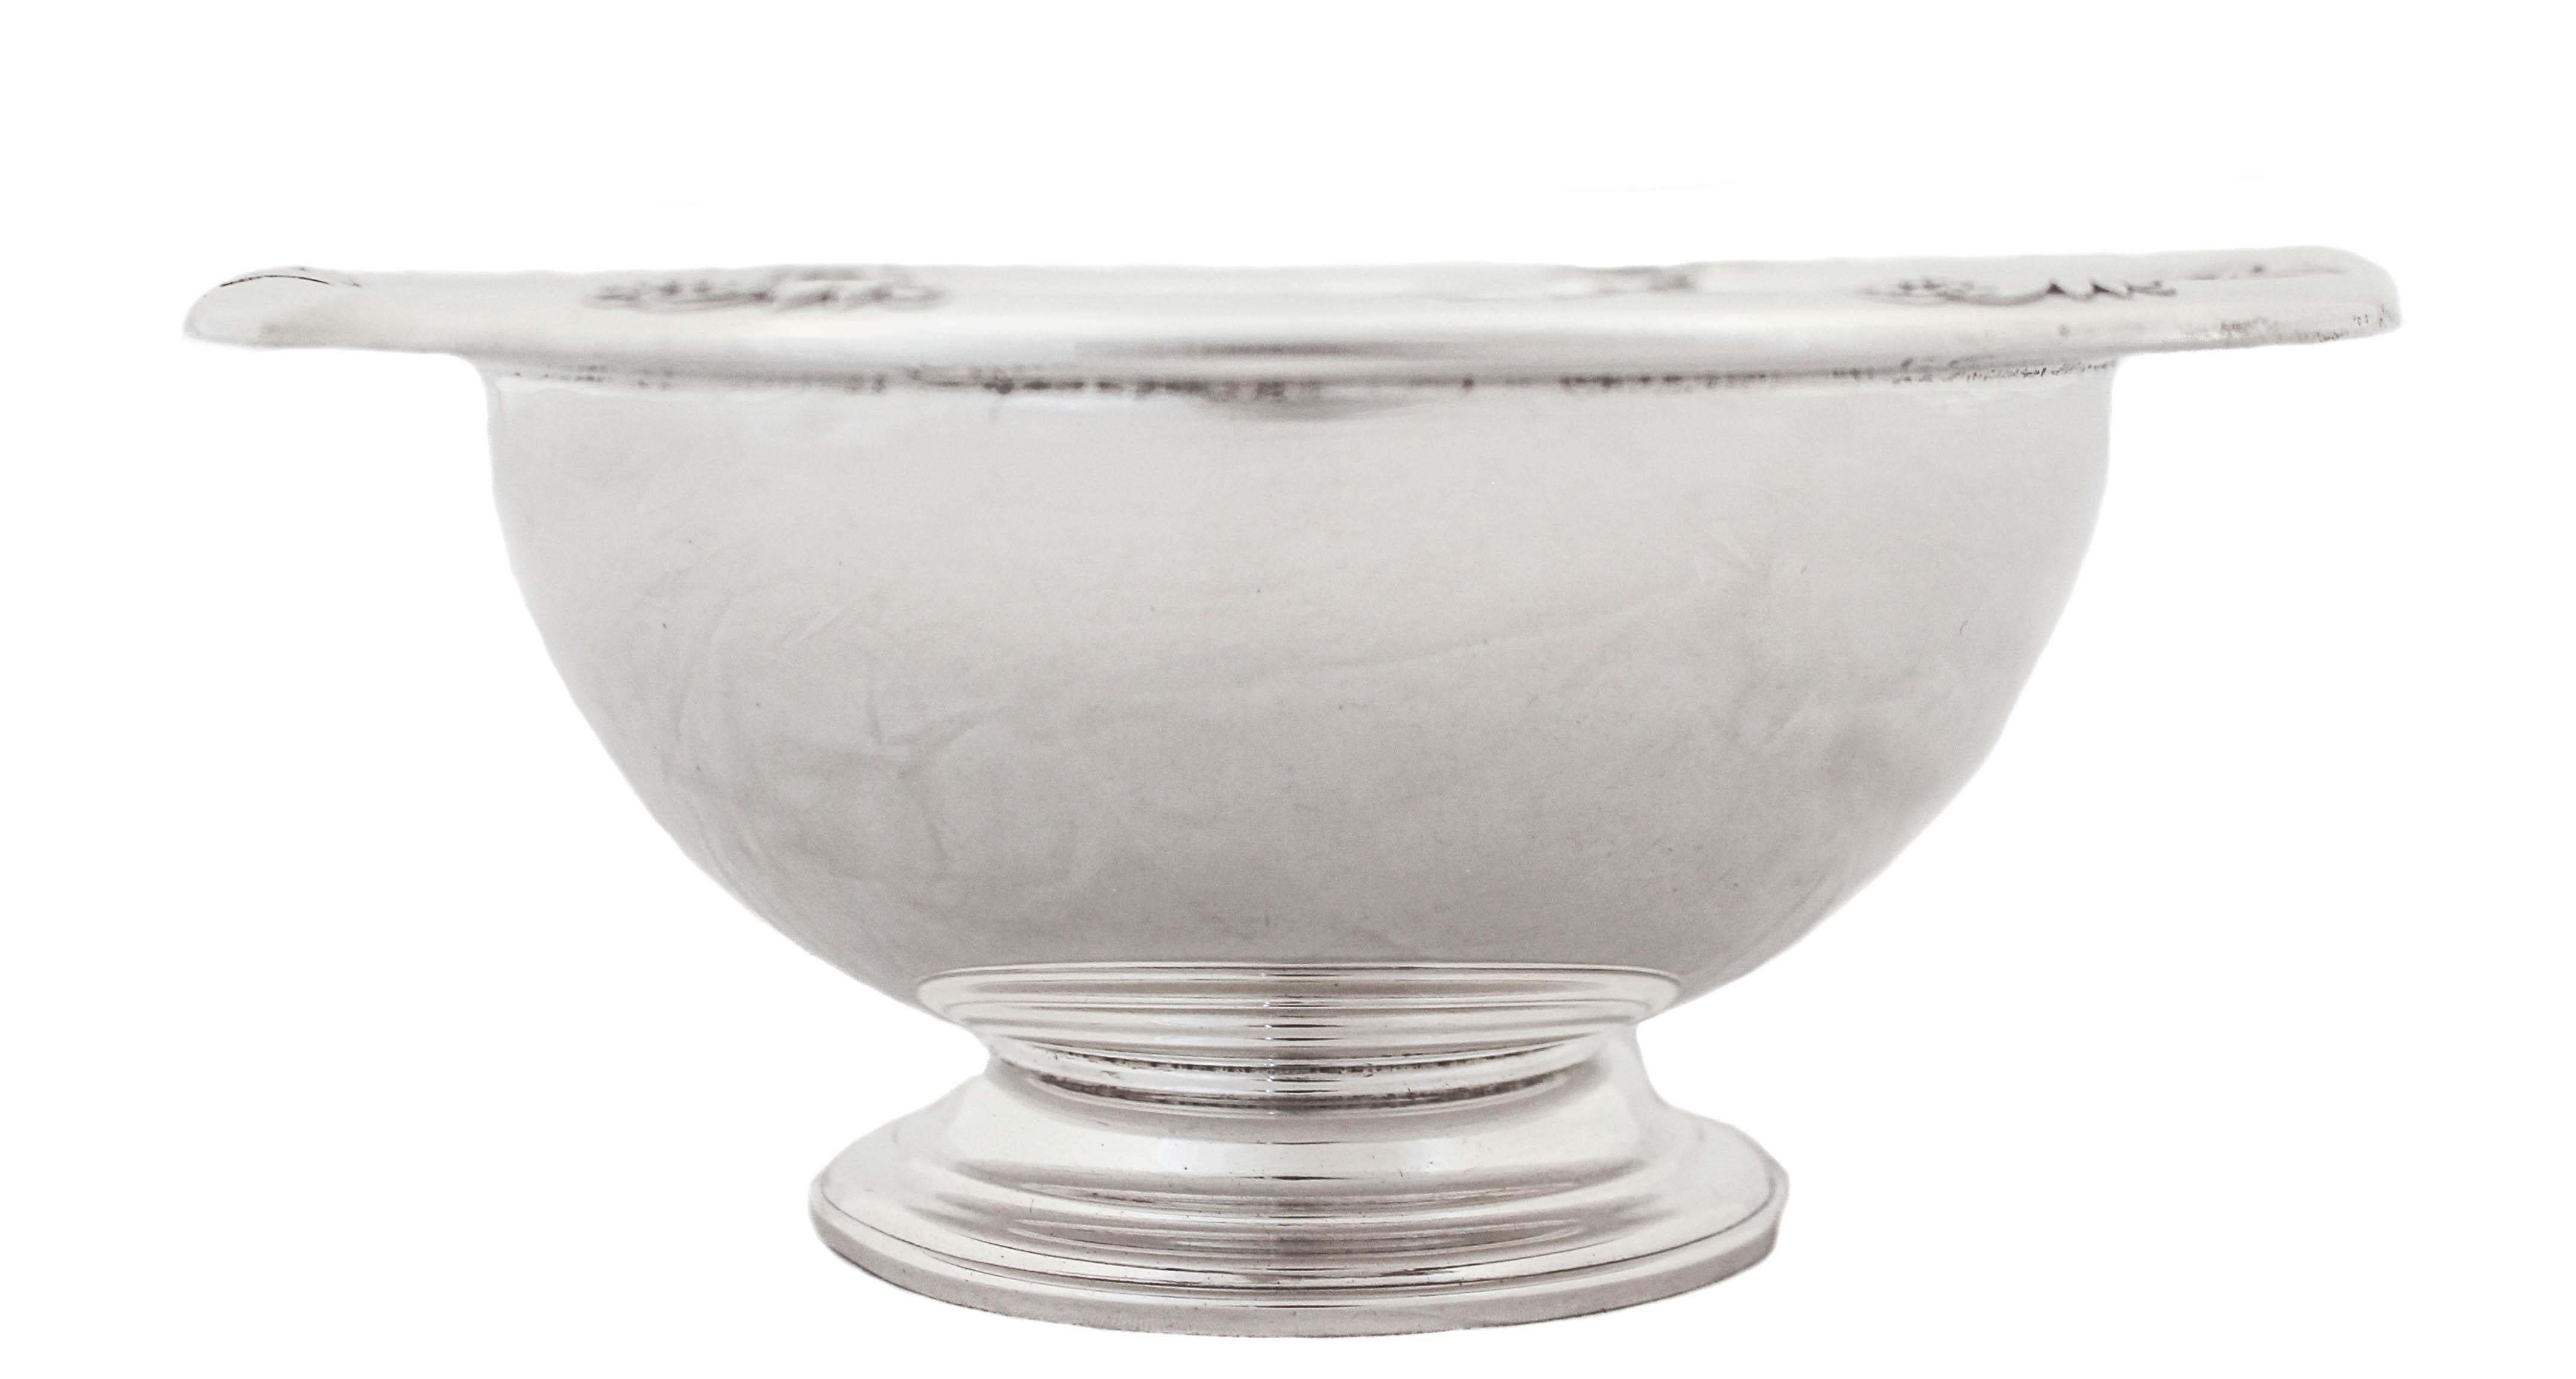 Being offered is a sterling silver sauce bowl with under-plate and serving spoon. These pieces are in the “Spring Glory” pattern by International Silver. One of the companies most all time popular patterns, Spring Glory is an Art Deco classic.